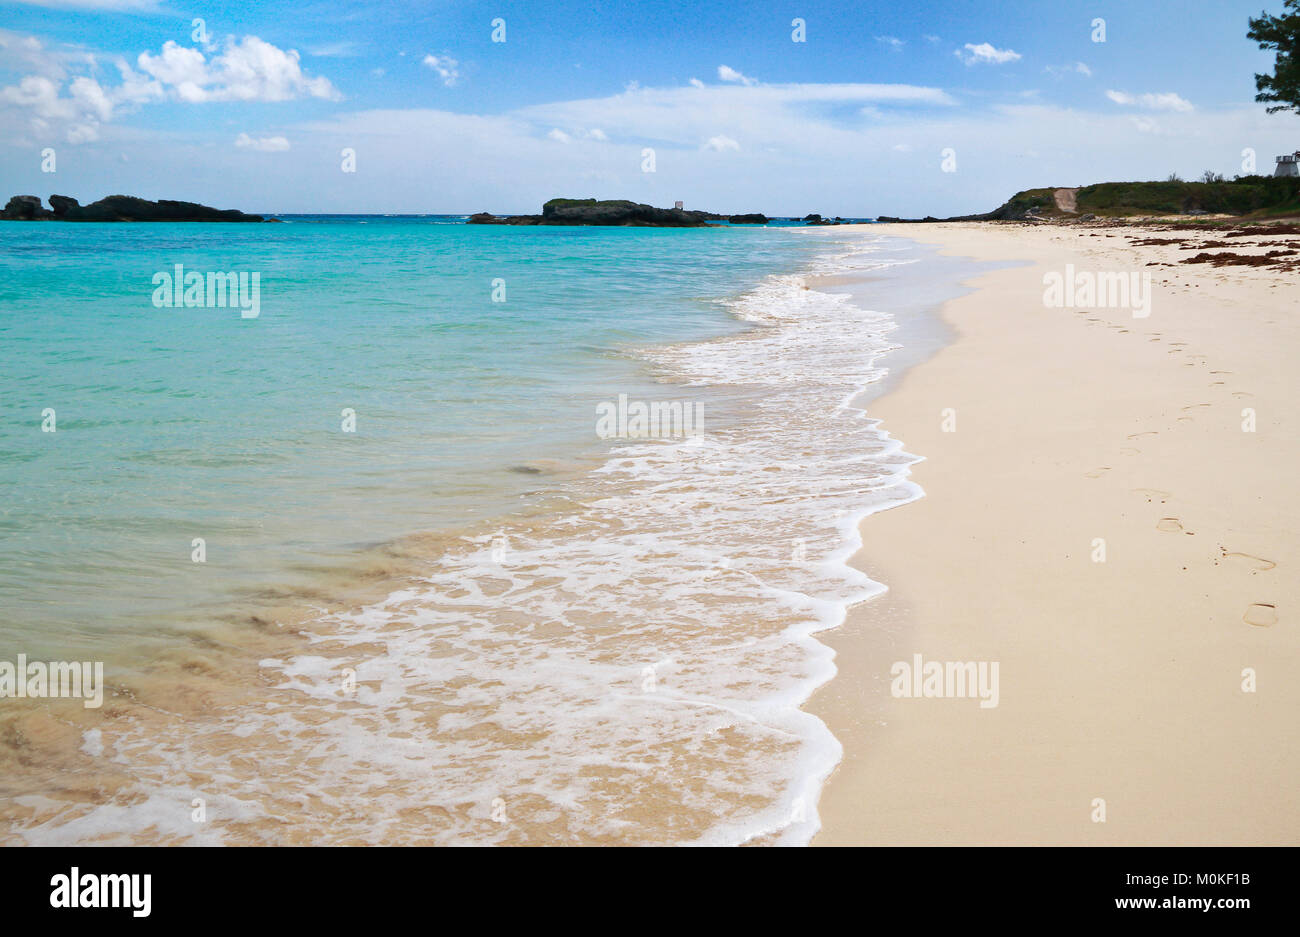 Bermuda beach with foot prints along turquoise sea water in Long Bay, Copper's Island Nature Reserve, under blue sky and white clouds Stock Photo